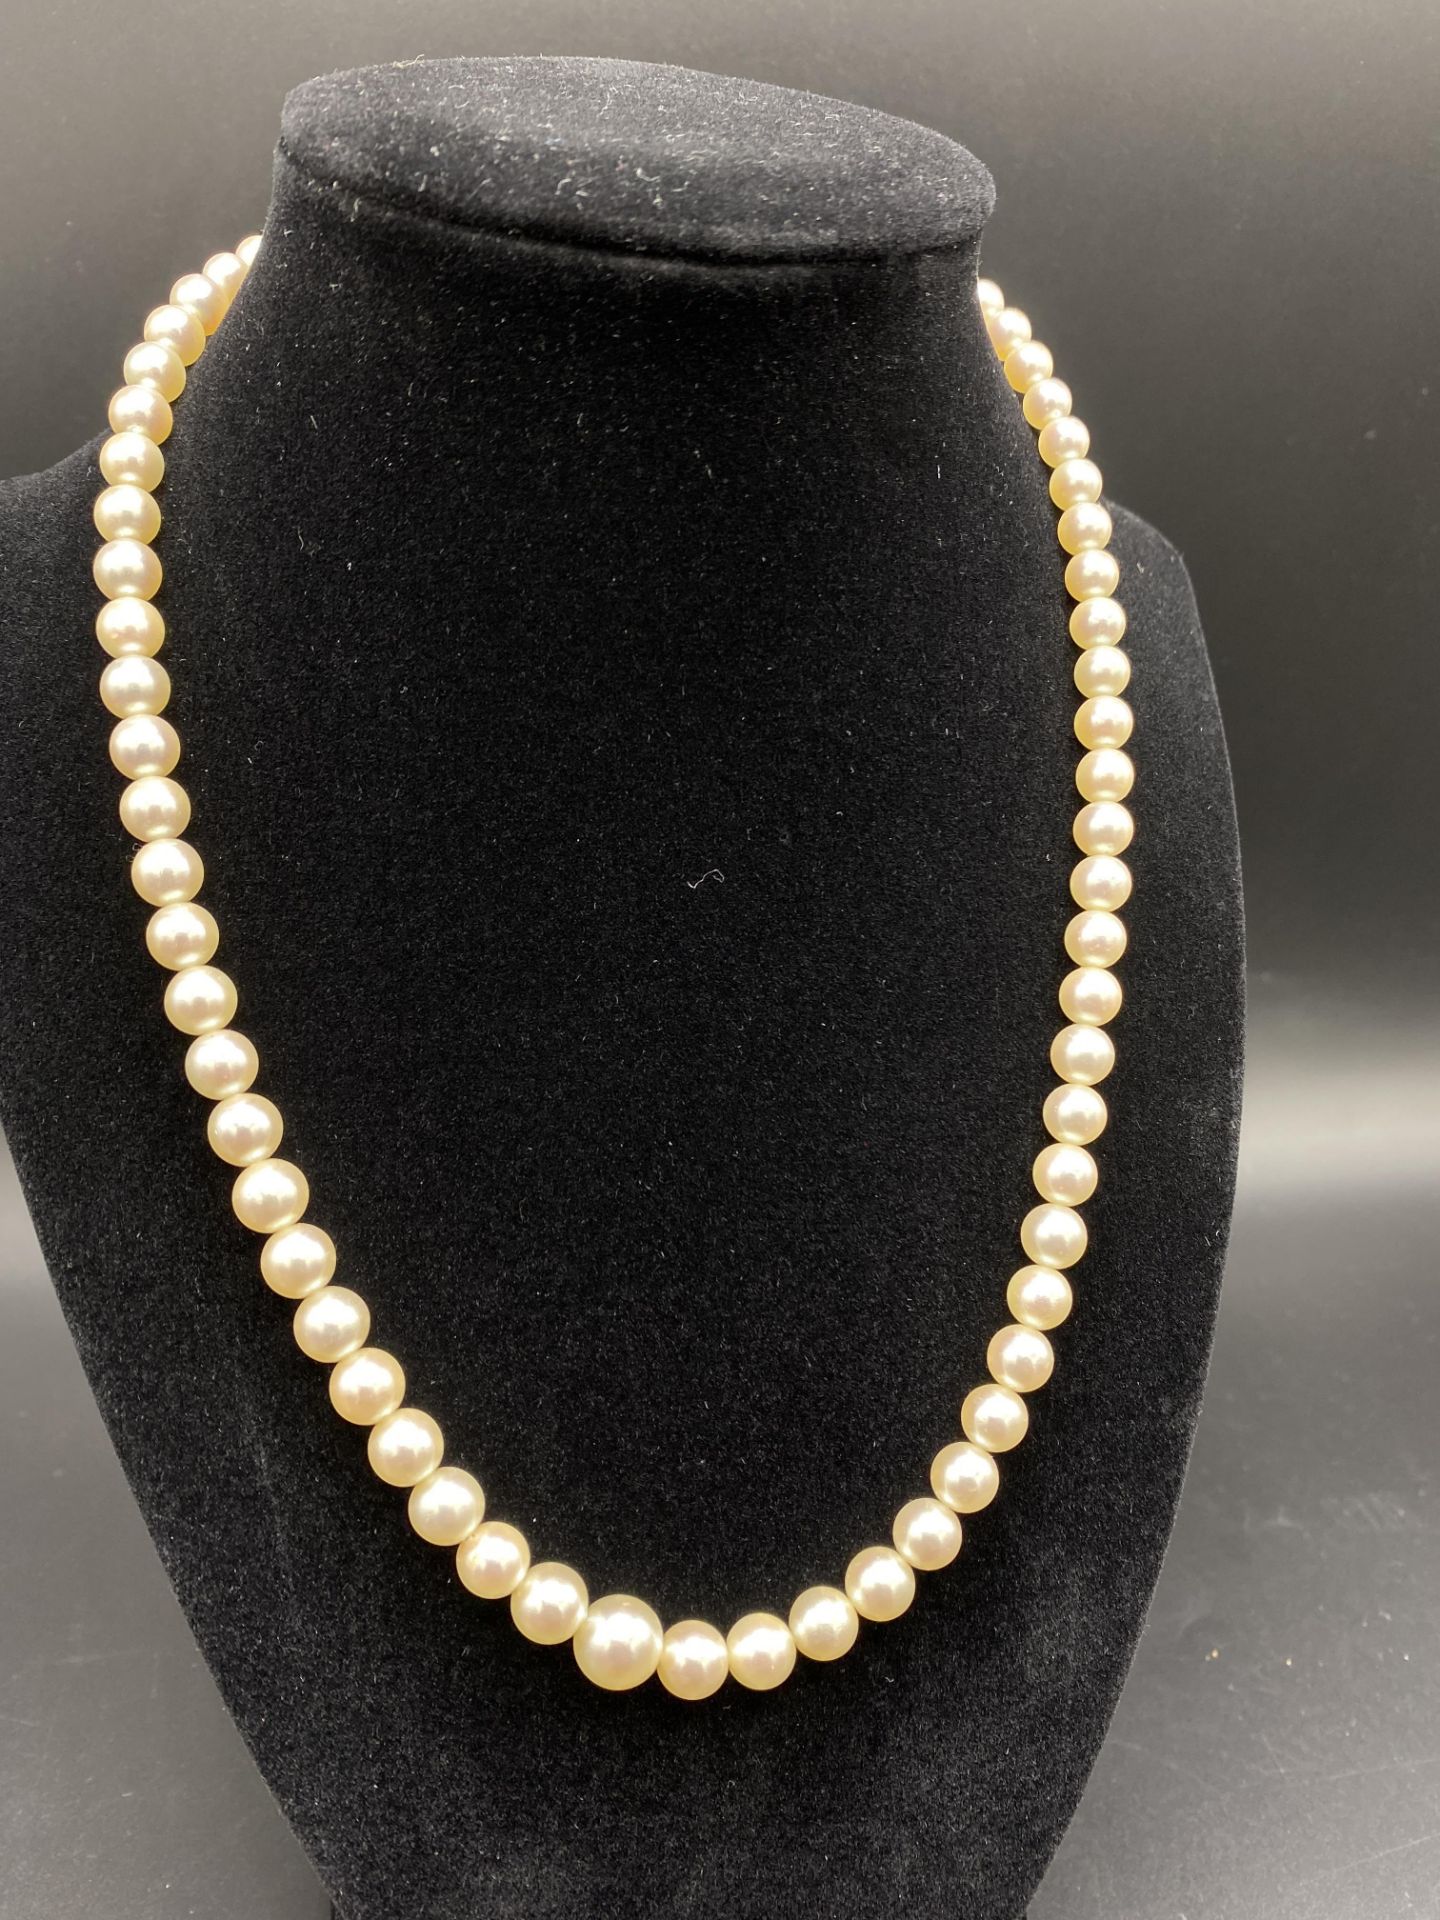 Pearl necklace with matching earrings - Image 3 of 7